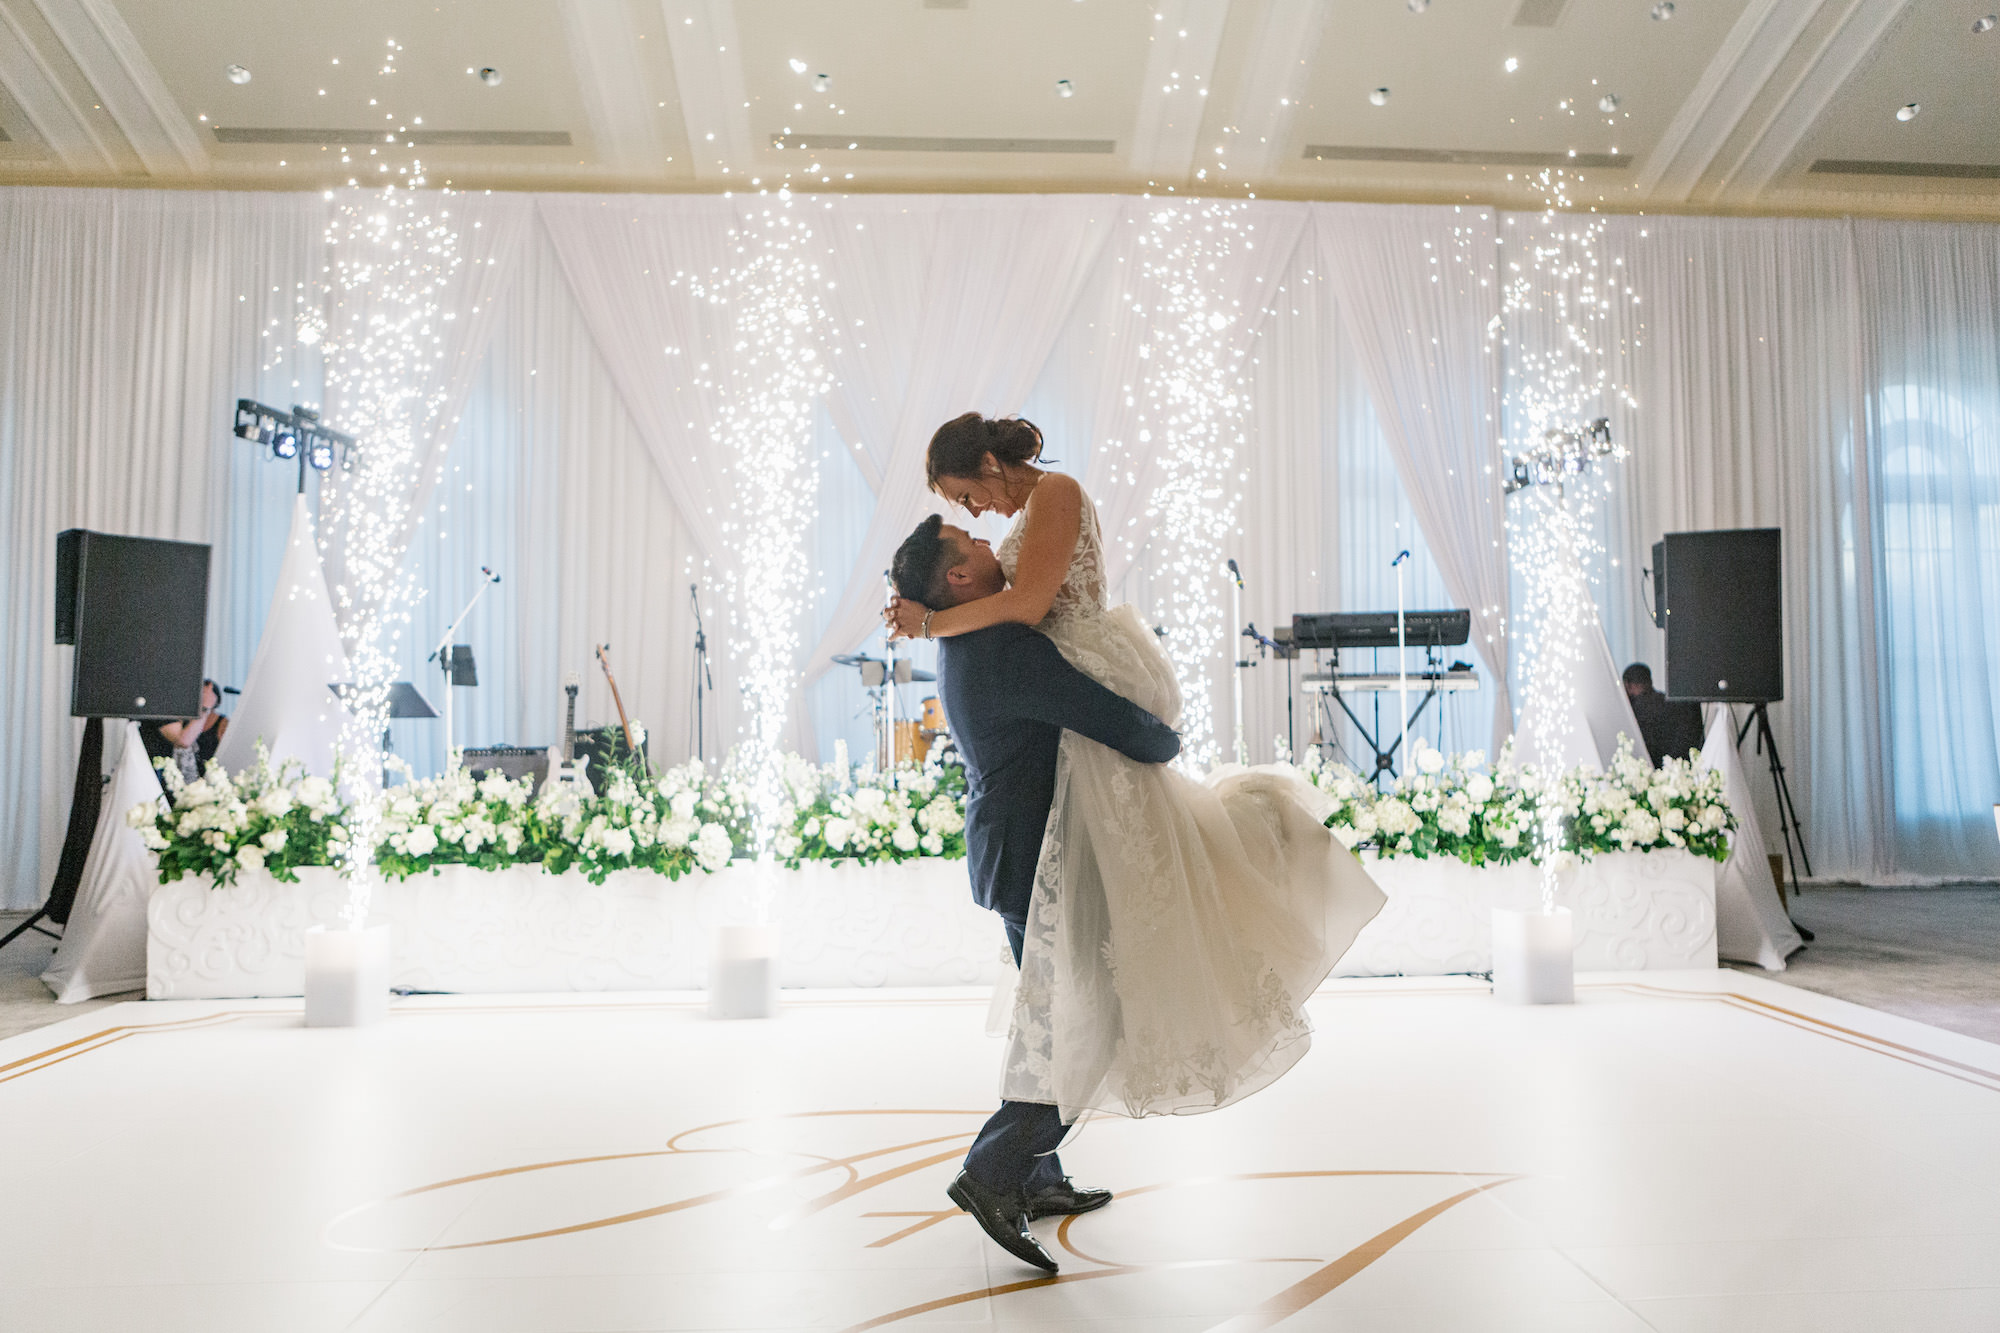 Cold Spark Machine First Dance Ideas | Tampa Bay Planner Parties a la Carte | Videographer Mars and the Moon Films